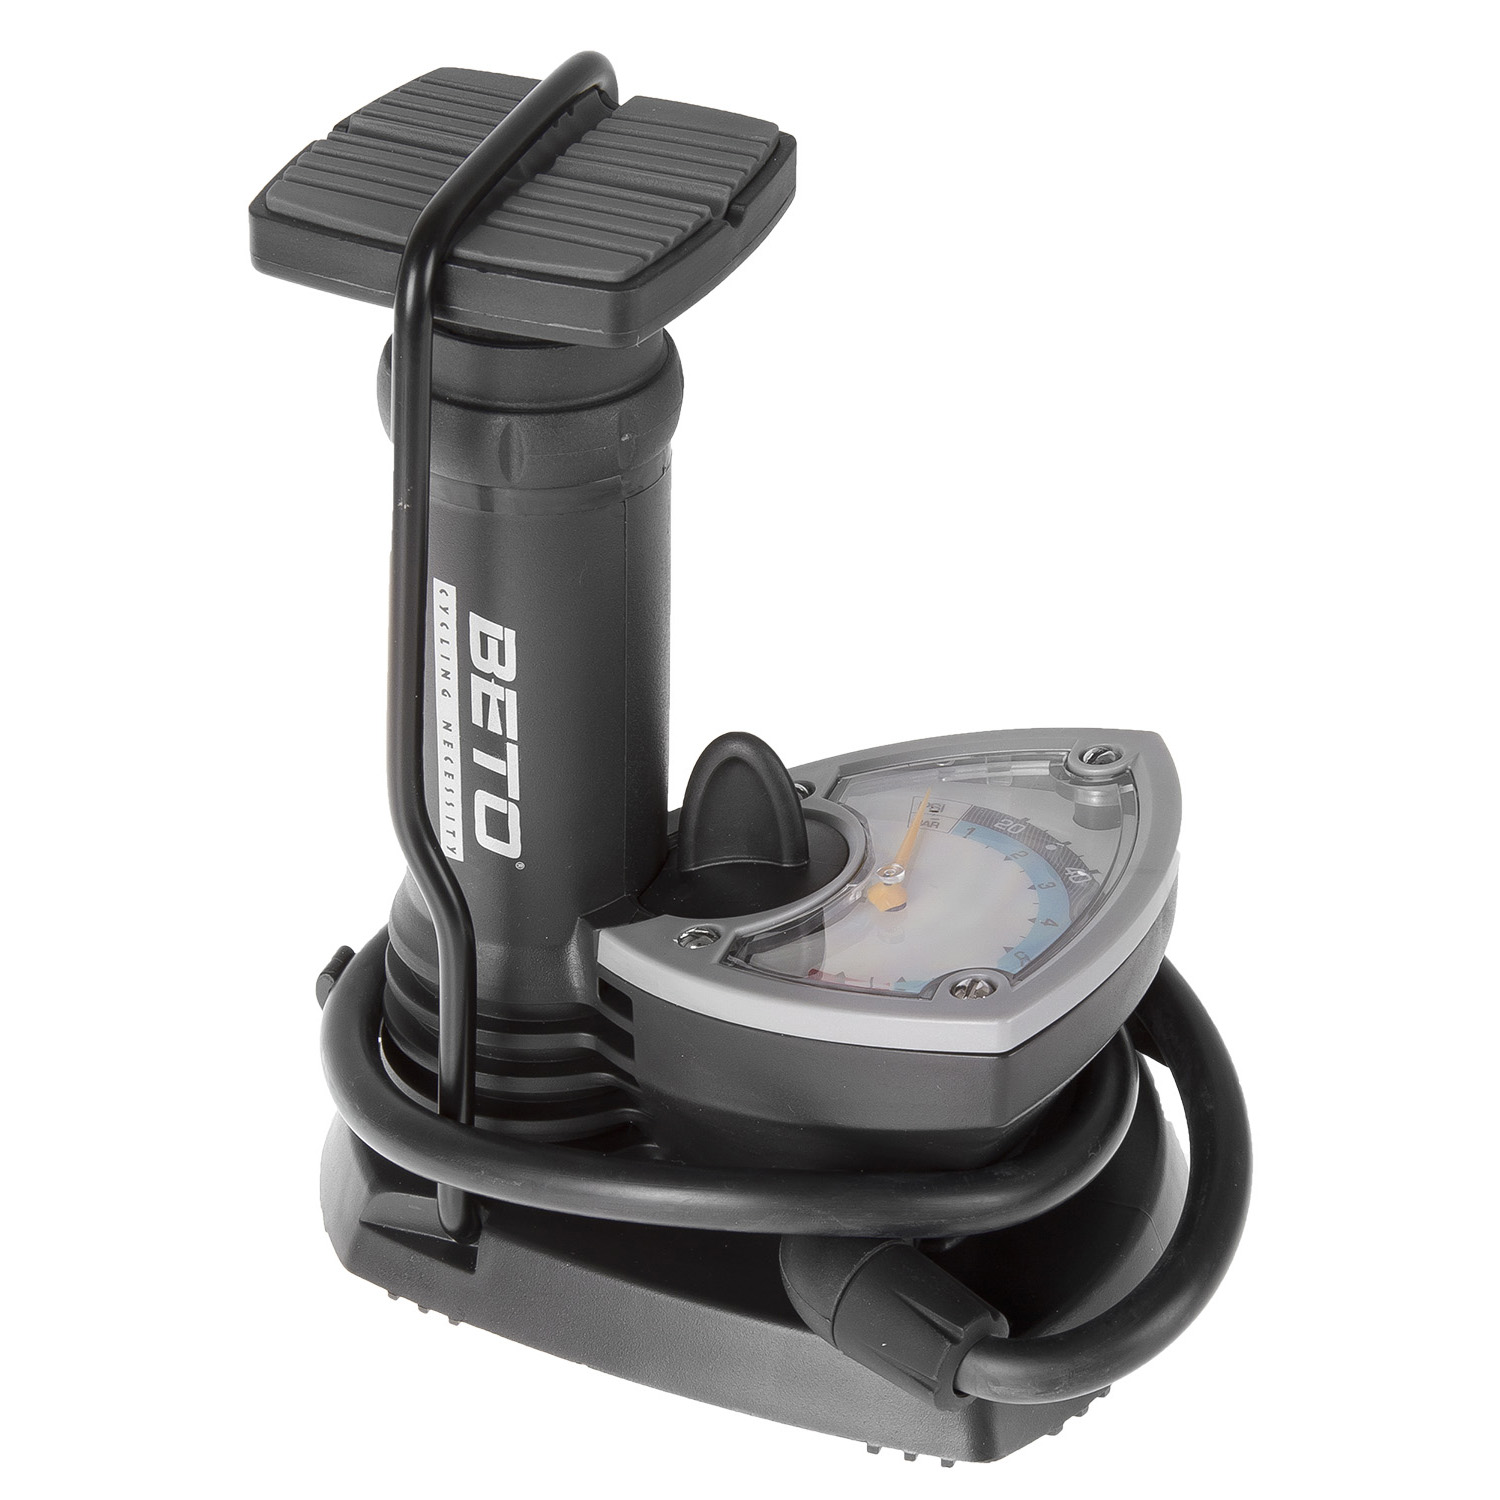 BETO foot pump – AVAILABLE IN SELECTED BIKE SHOPS